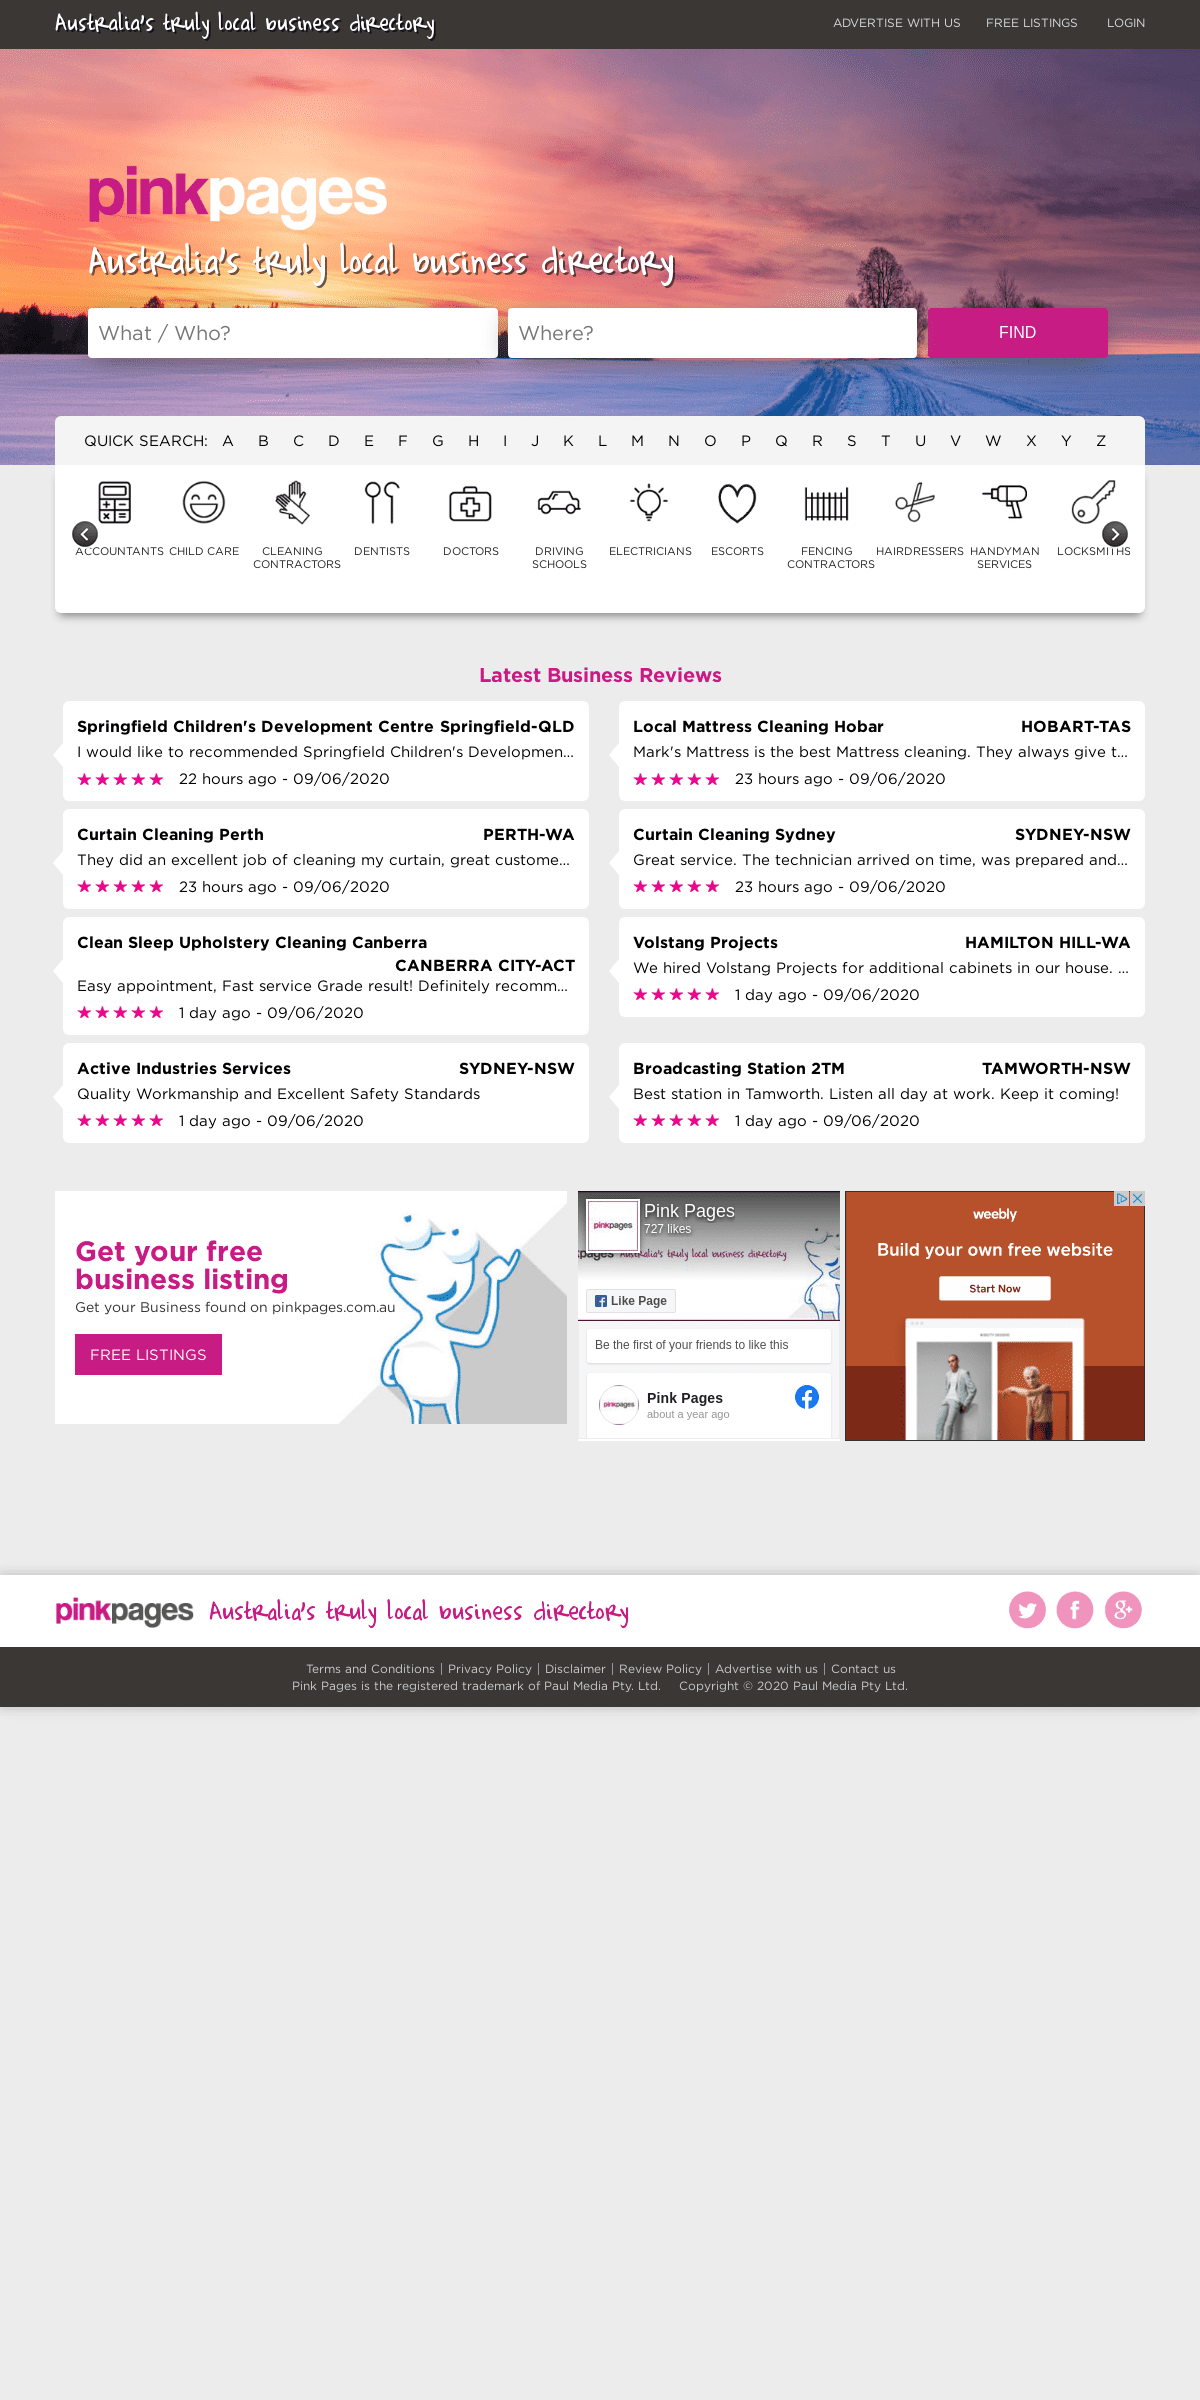 A complete backup of pinkpages.com.au